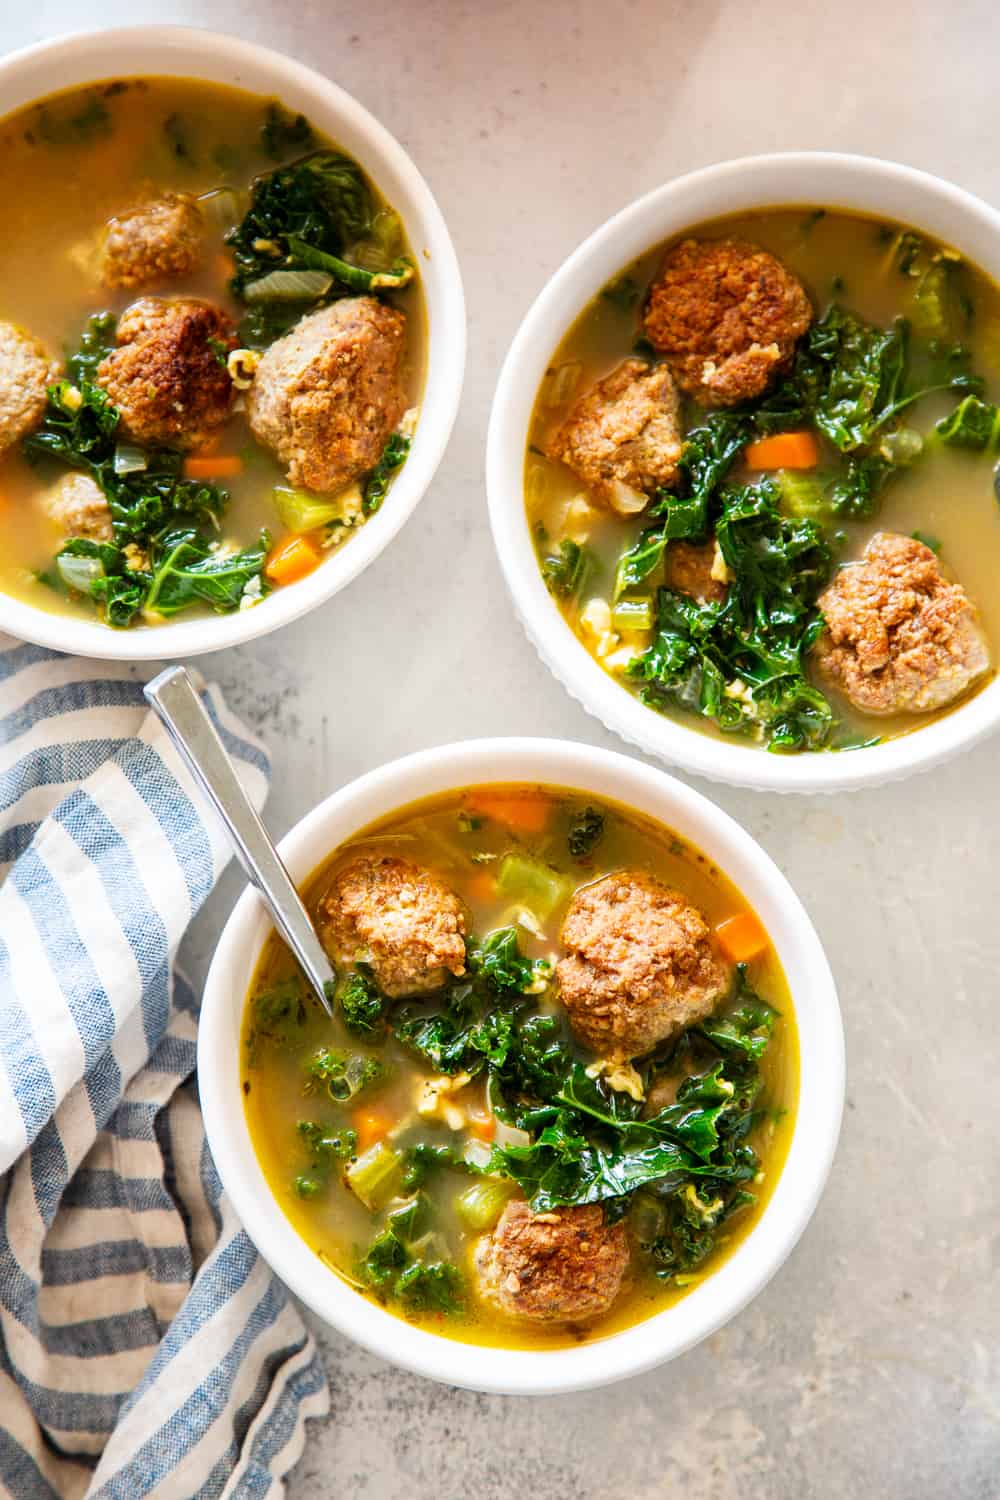 This Paleo Italian Wedding Soup is the perfect cozy comfort food! It’s easy to make, packed with the tastiest Italian sausage meatballs and plenty of veggies. It’s grain free, Whole30 friendly and keto. #paleo #whole30 #keto #cleaneating #soup